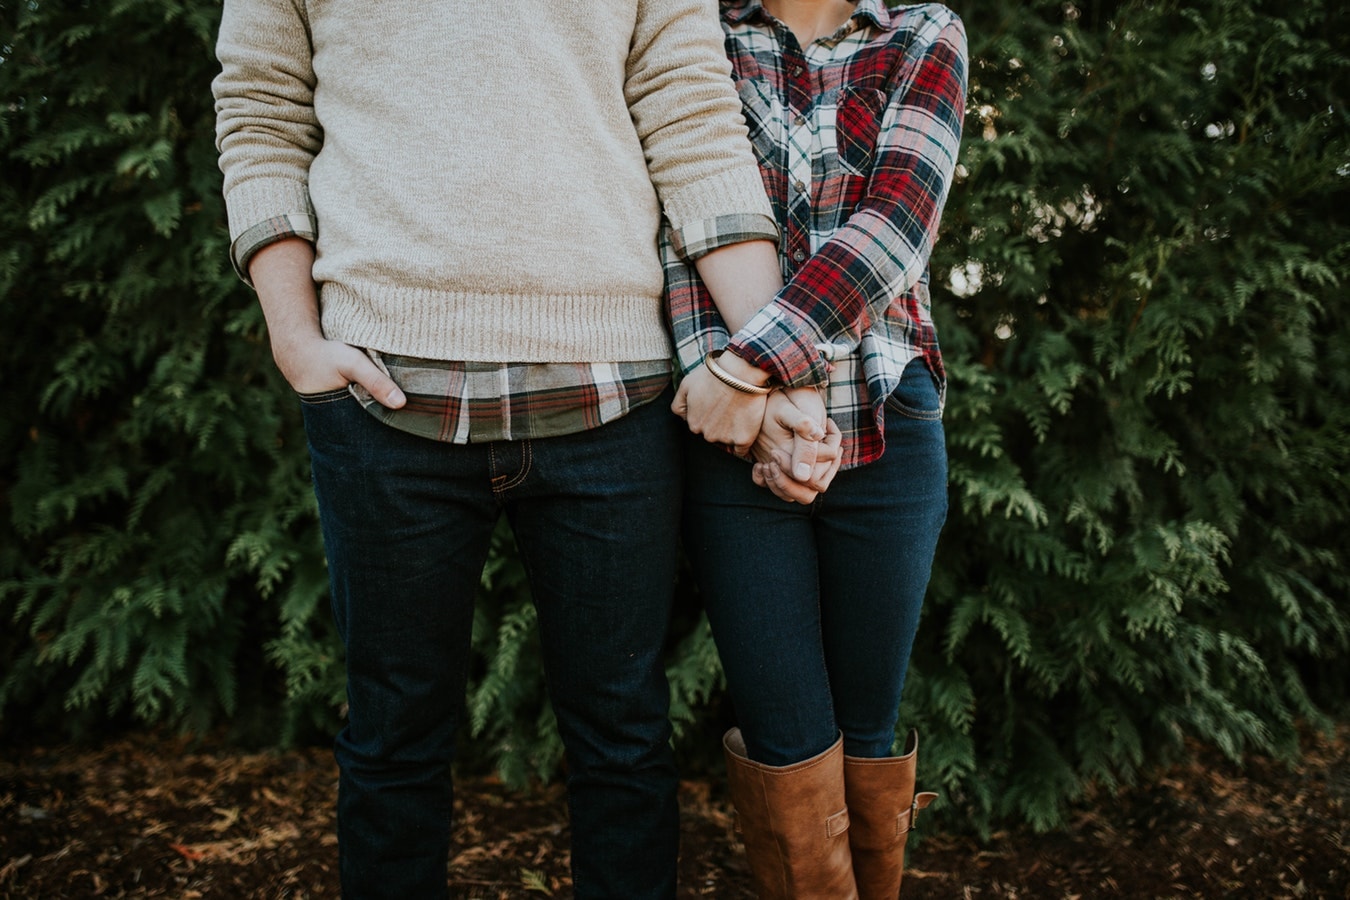 6 More Ways to Date Your Husband in the Fall